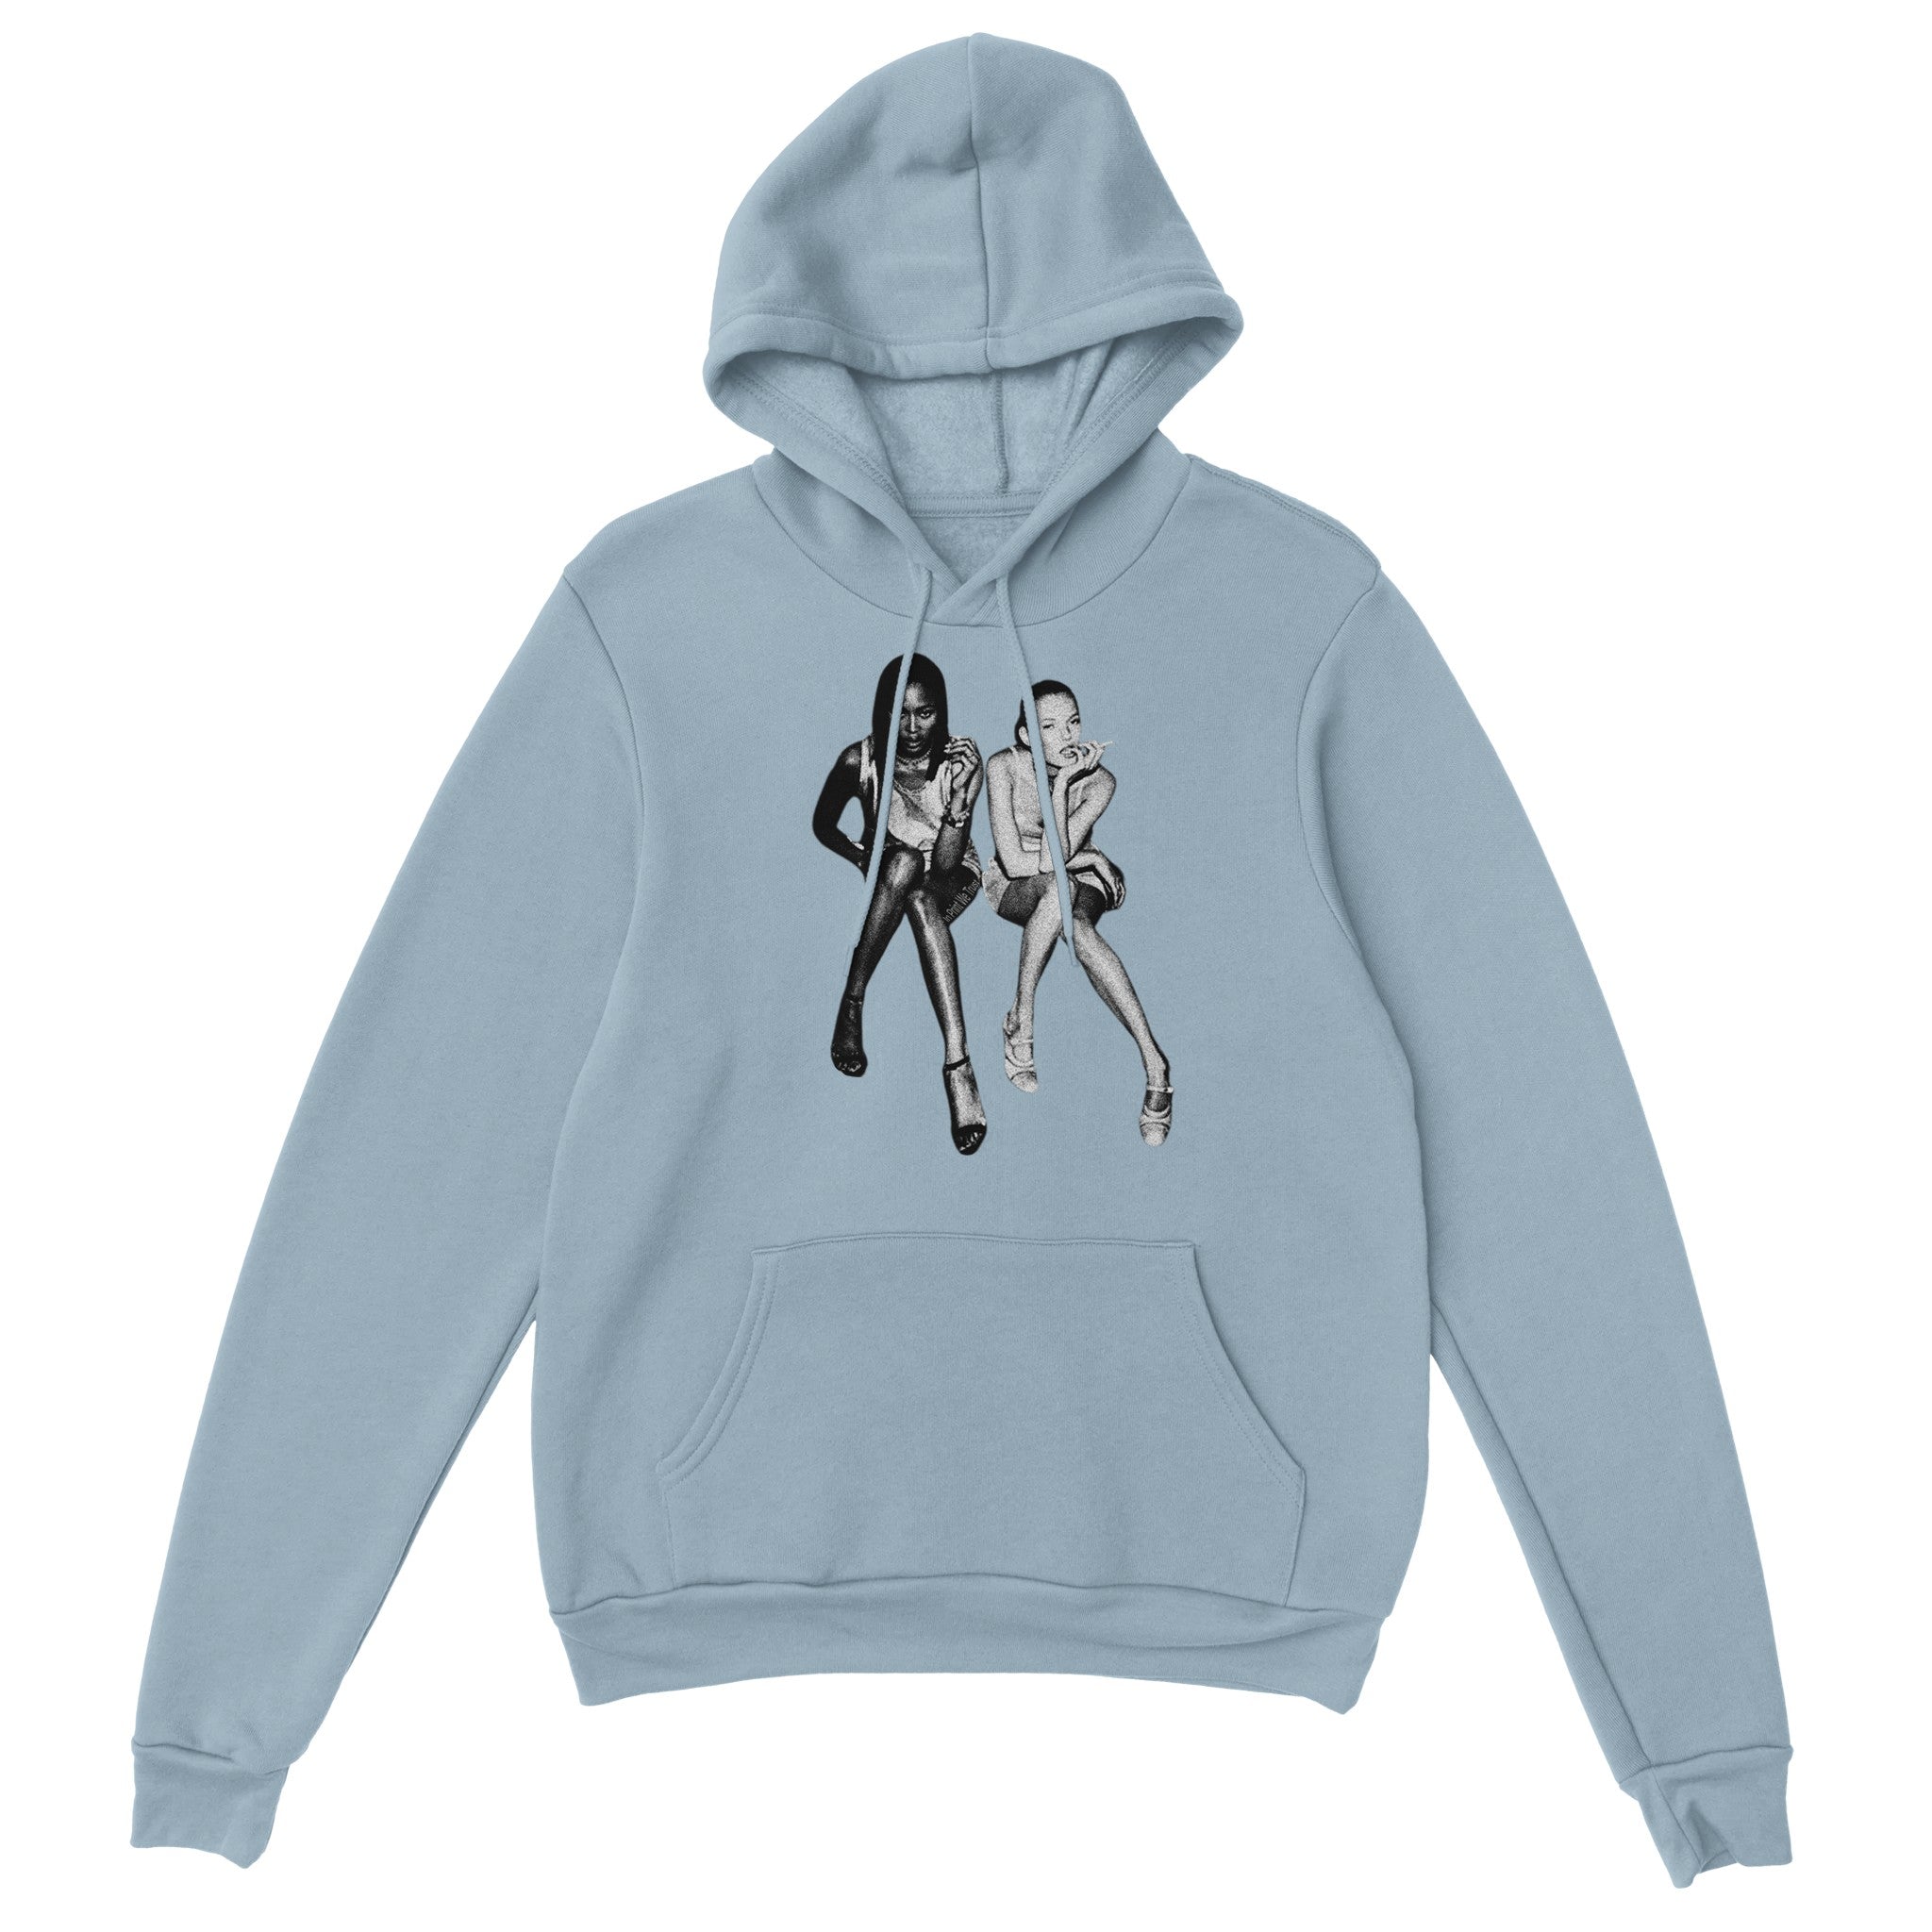 'After Party' hoodie - In Print We Trust